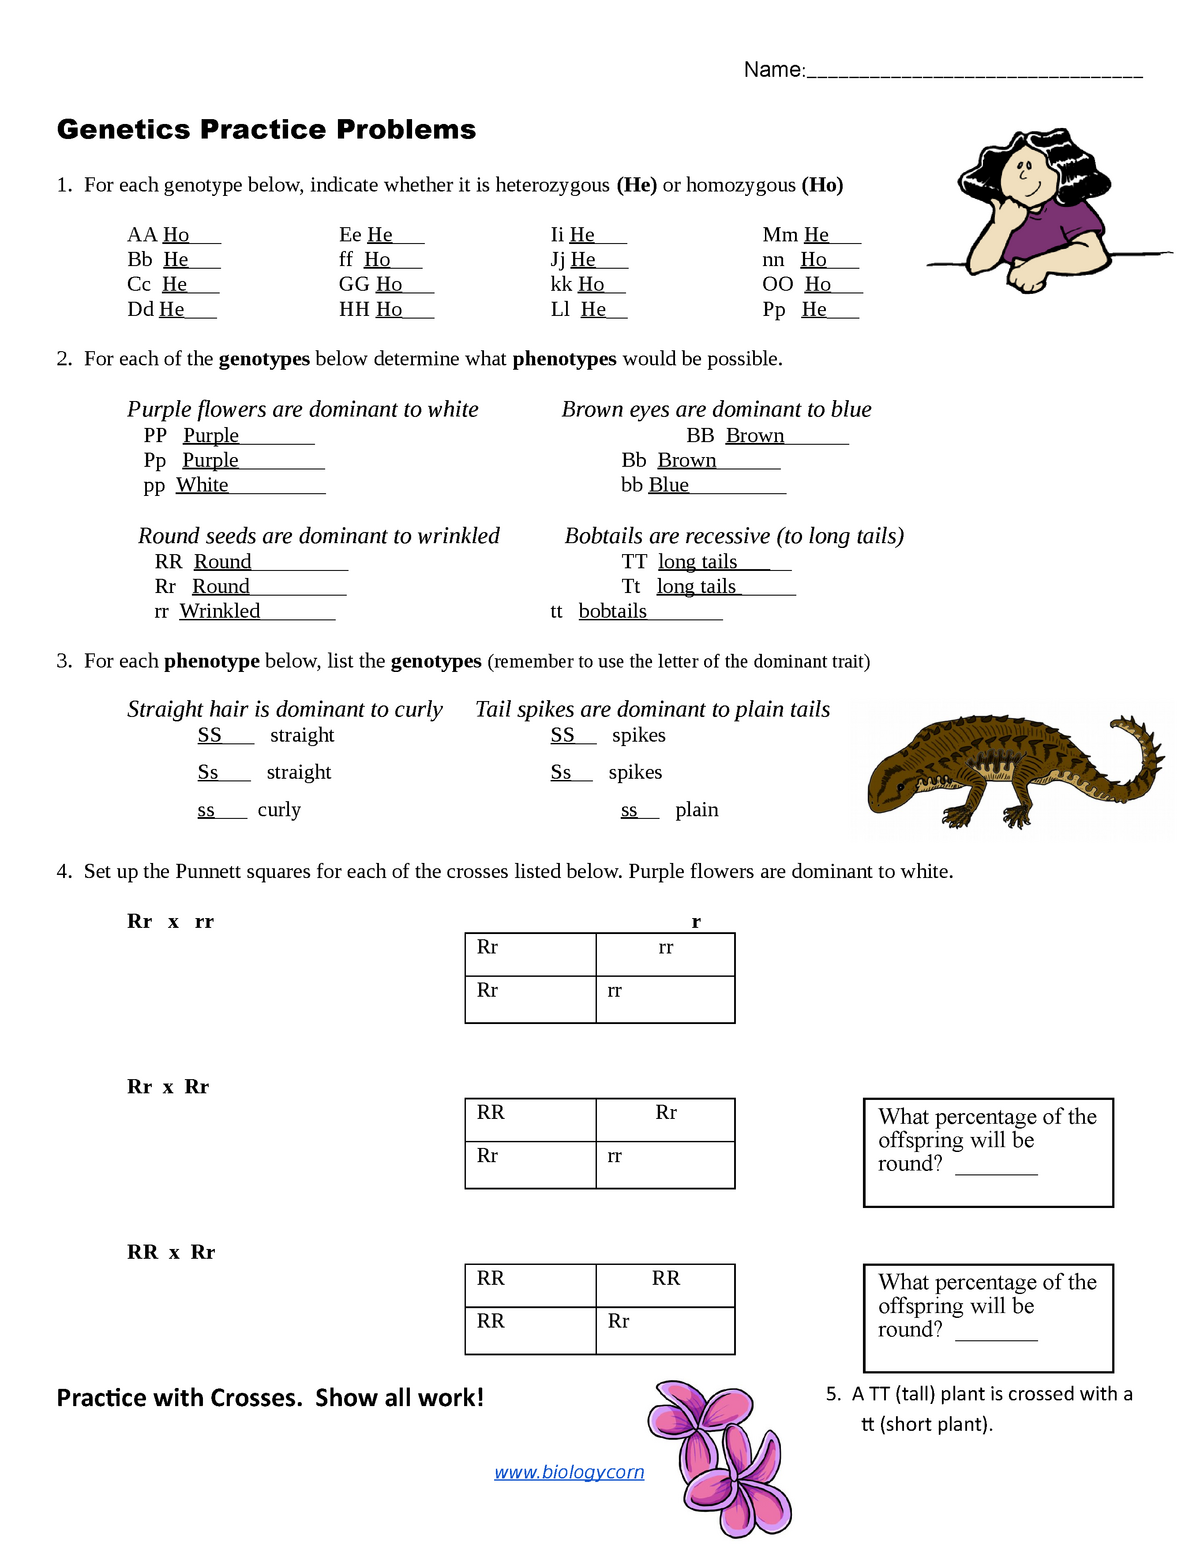 Copy of Practice - simple genetics - ENGL 22 - Science Fiction With Genetics Problems Worksheet Answer Key